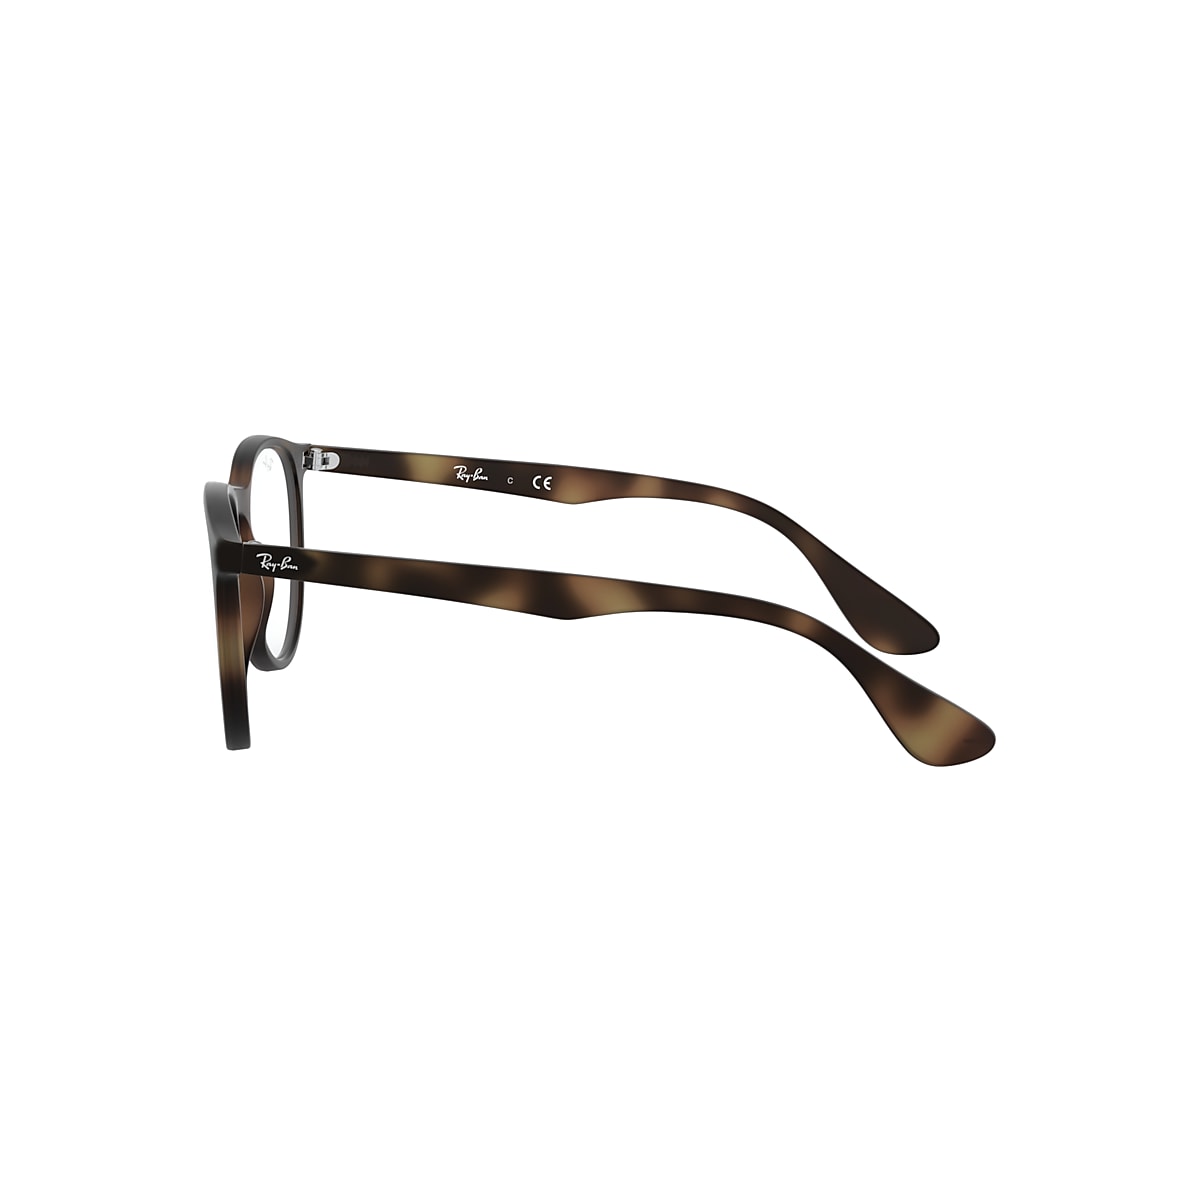 Ray-Ban 0RX7046 Glasses in Tortoise | Target Optical